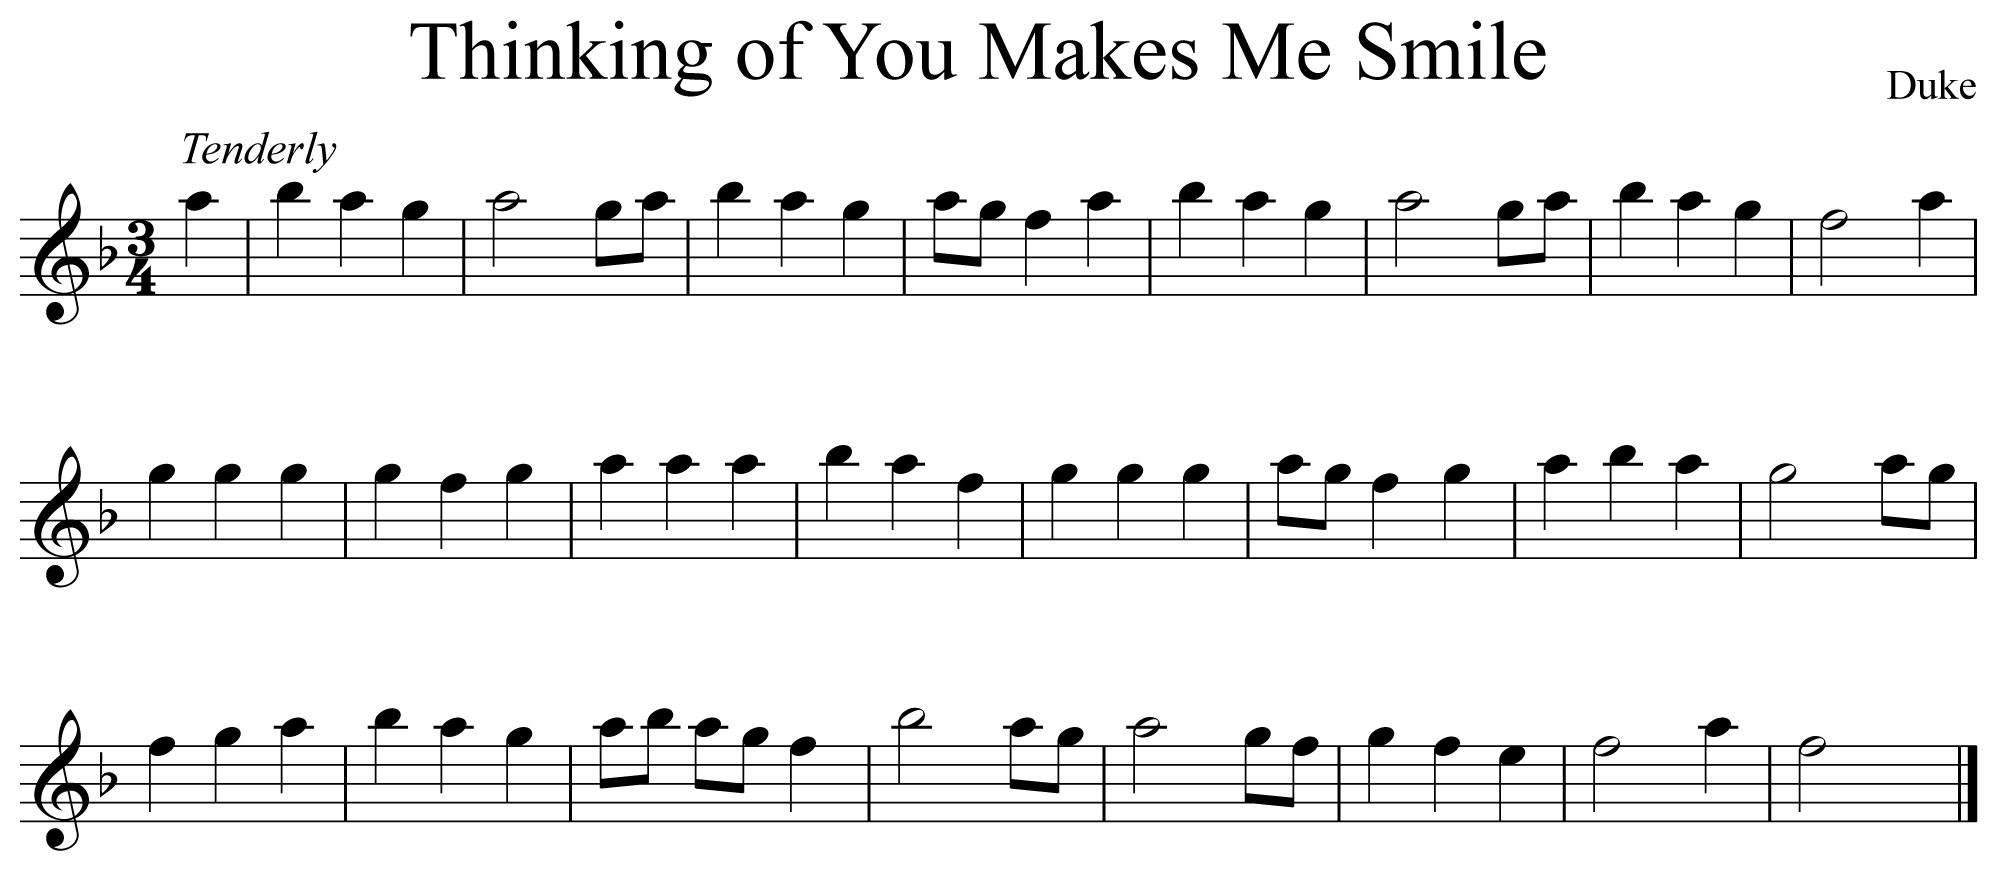 Thinking of You Makes Me Smile Notation Flute